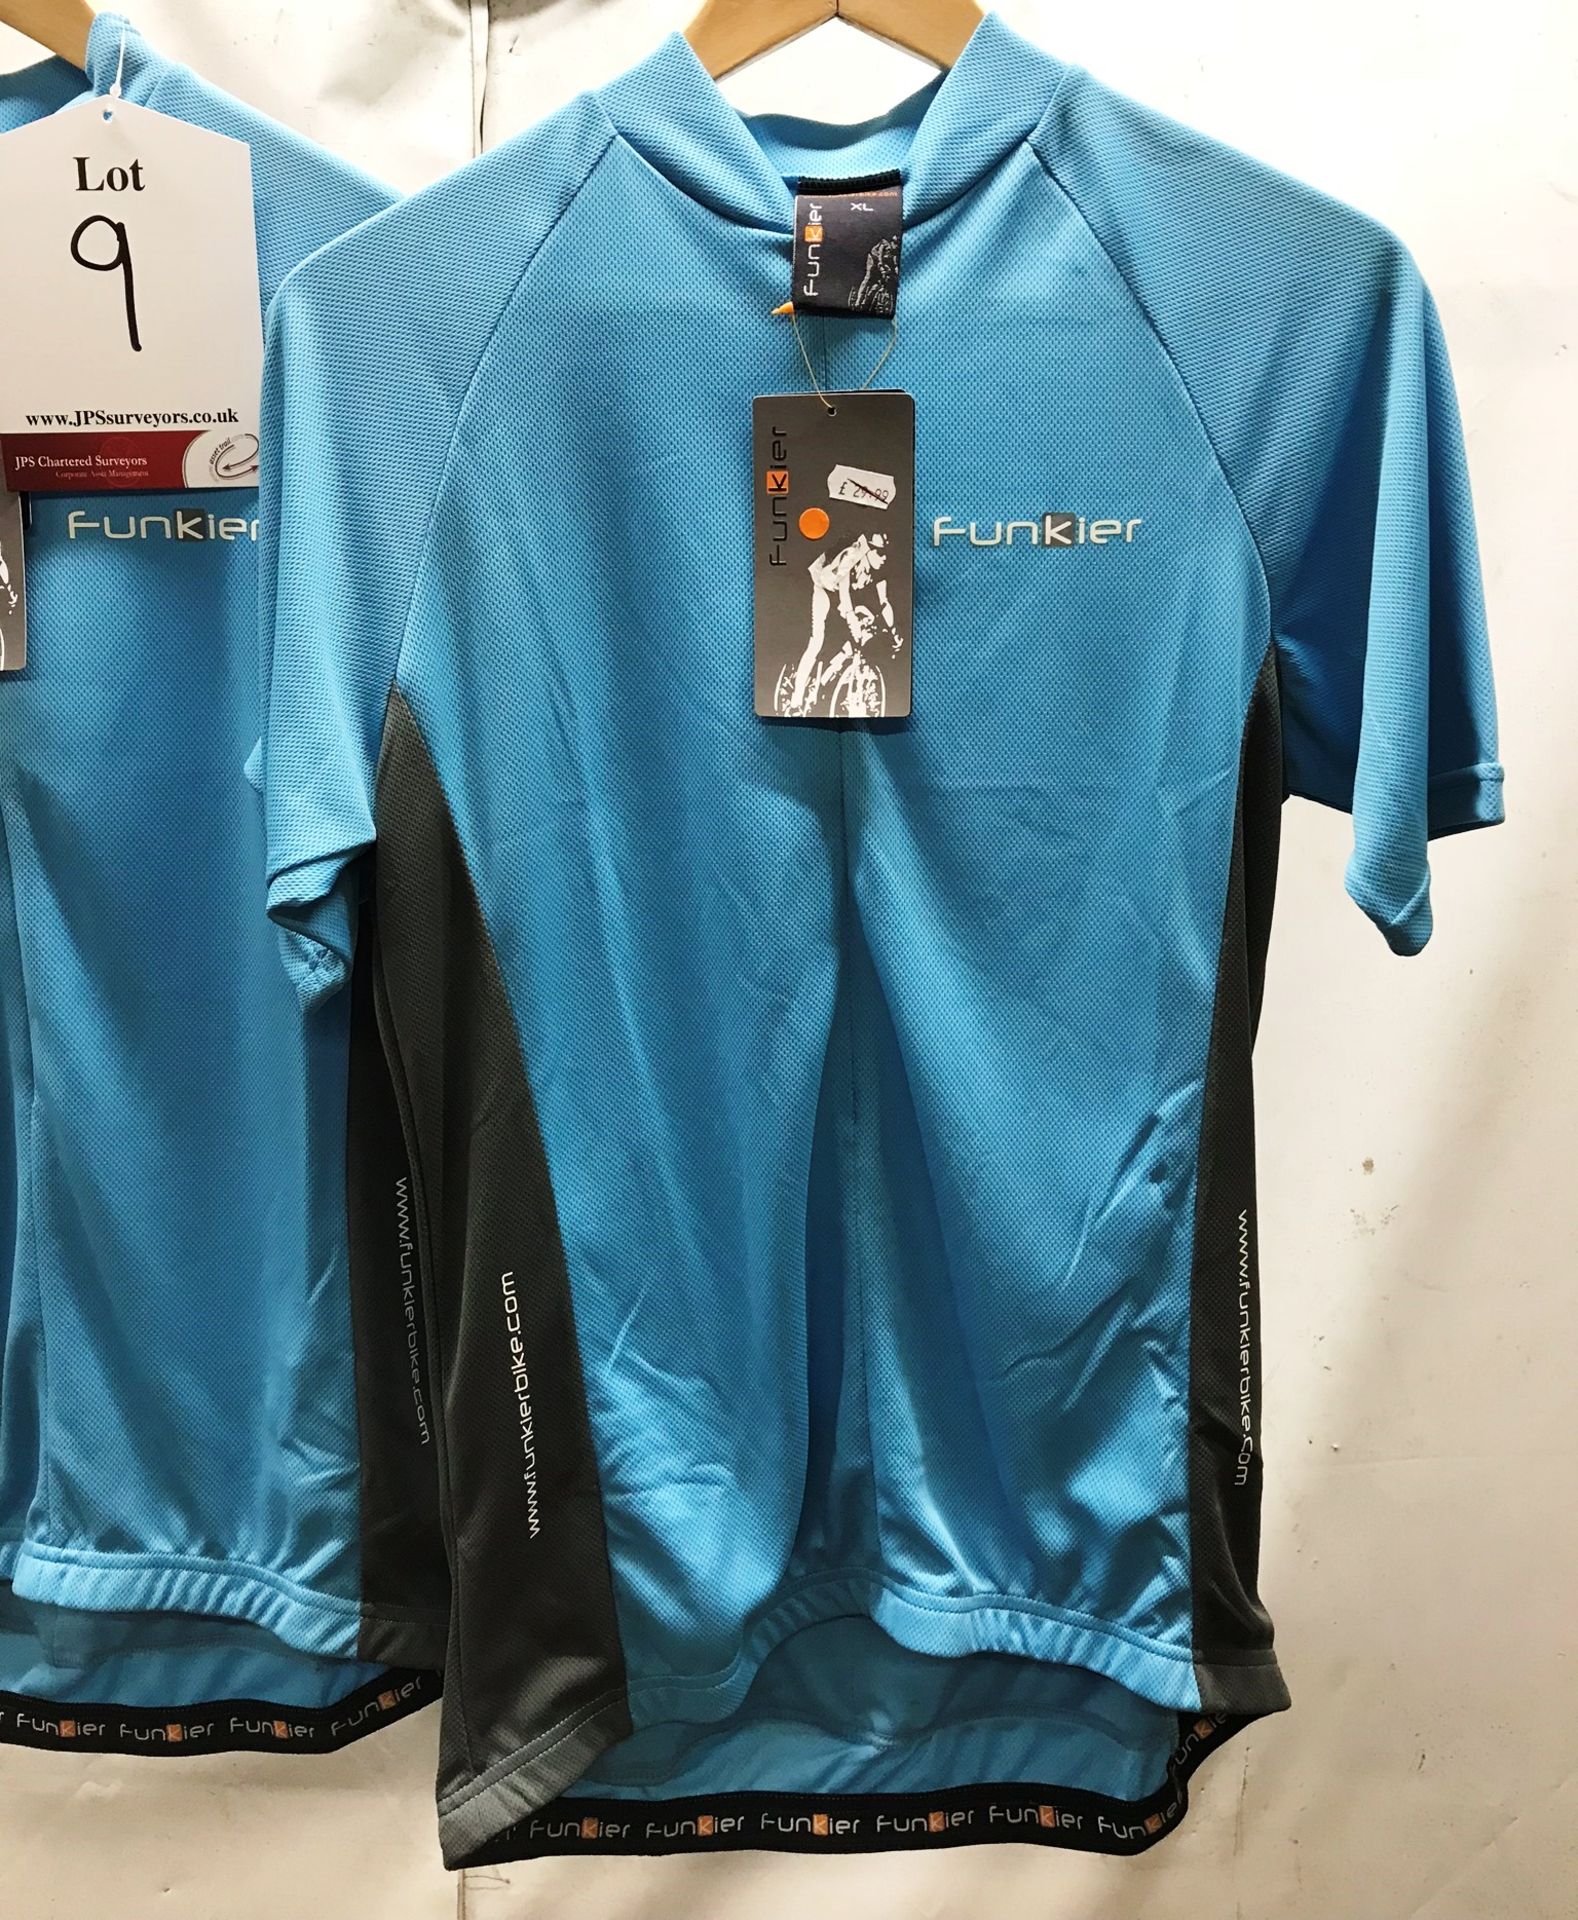 2 x Womens Funkier short sleeve cycling jerseys - size: 2 x XL - new w/ tags -RRP £59.98 - Image 2 of 4